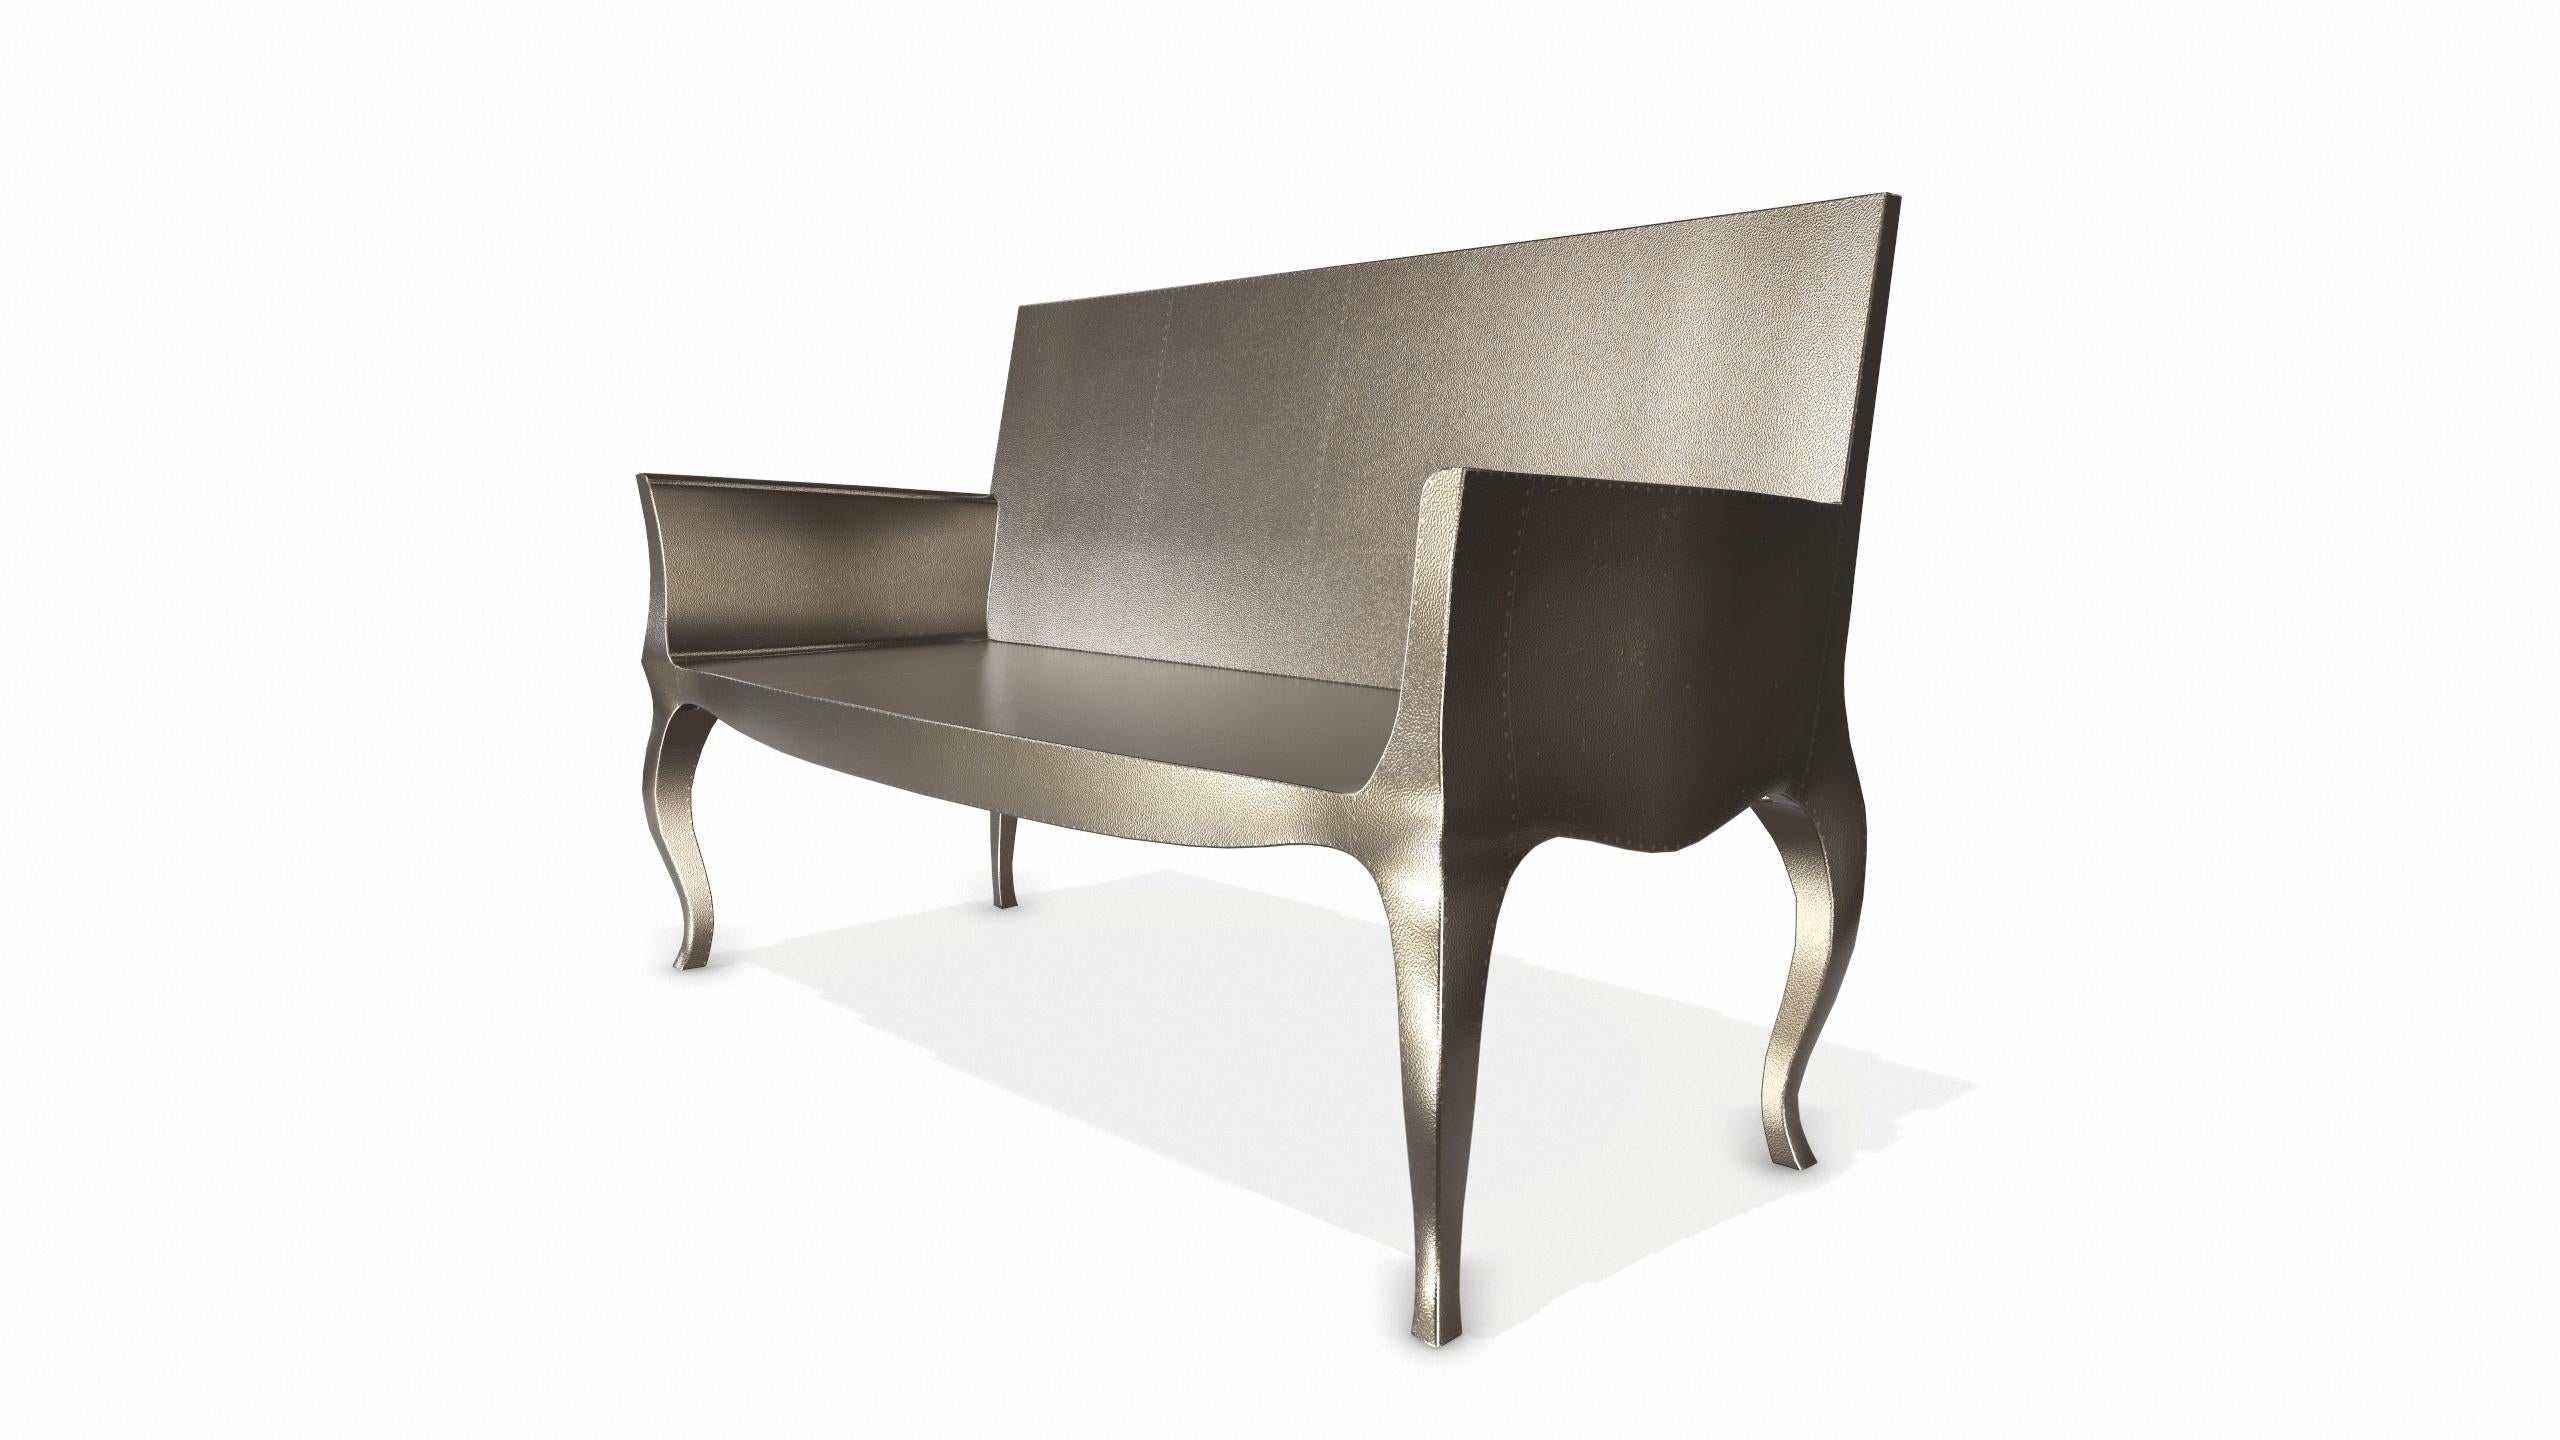 Hand-Crafted Louise Settee Art Deco Benches in Fine Hammered Antique Bronze by Paul Mathieu For Sale